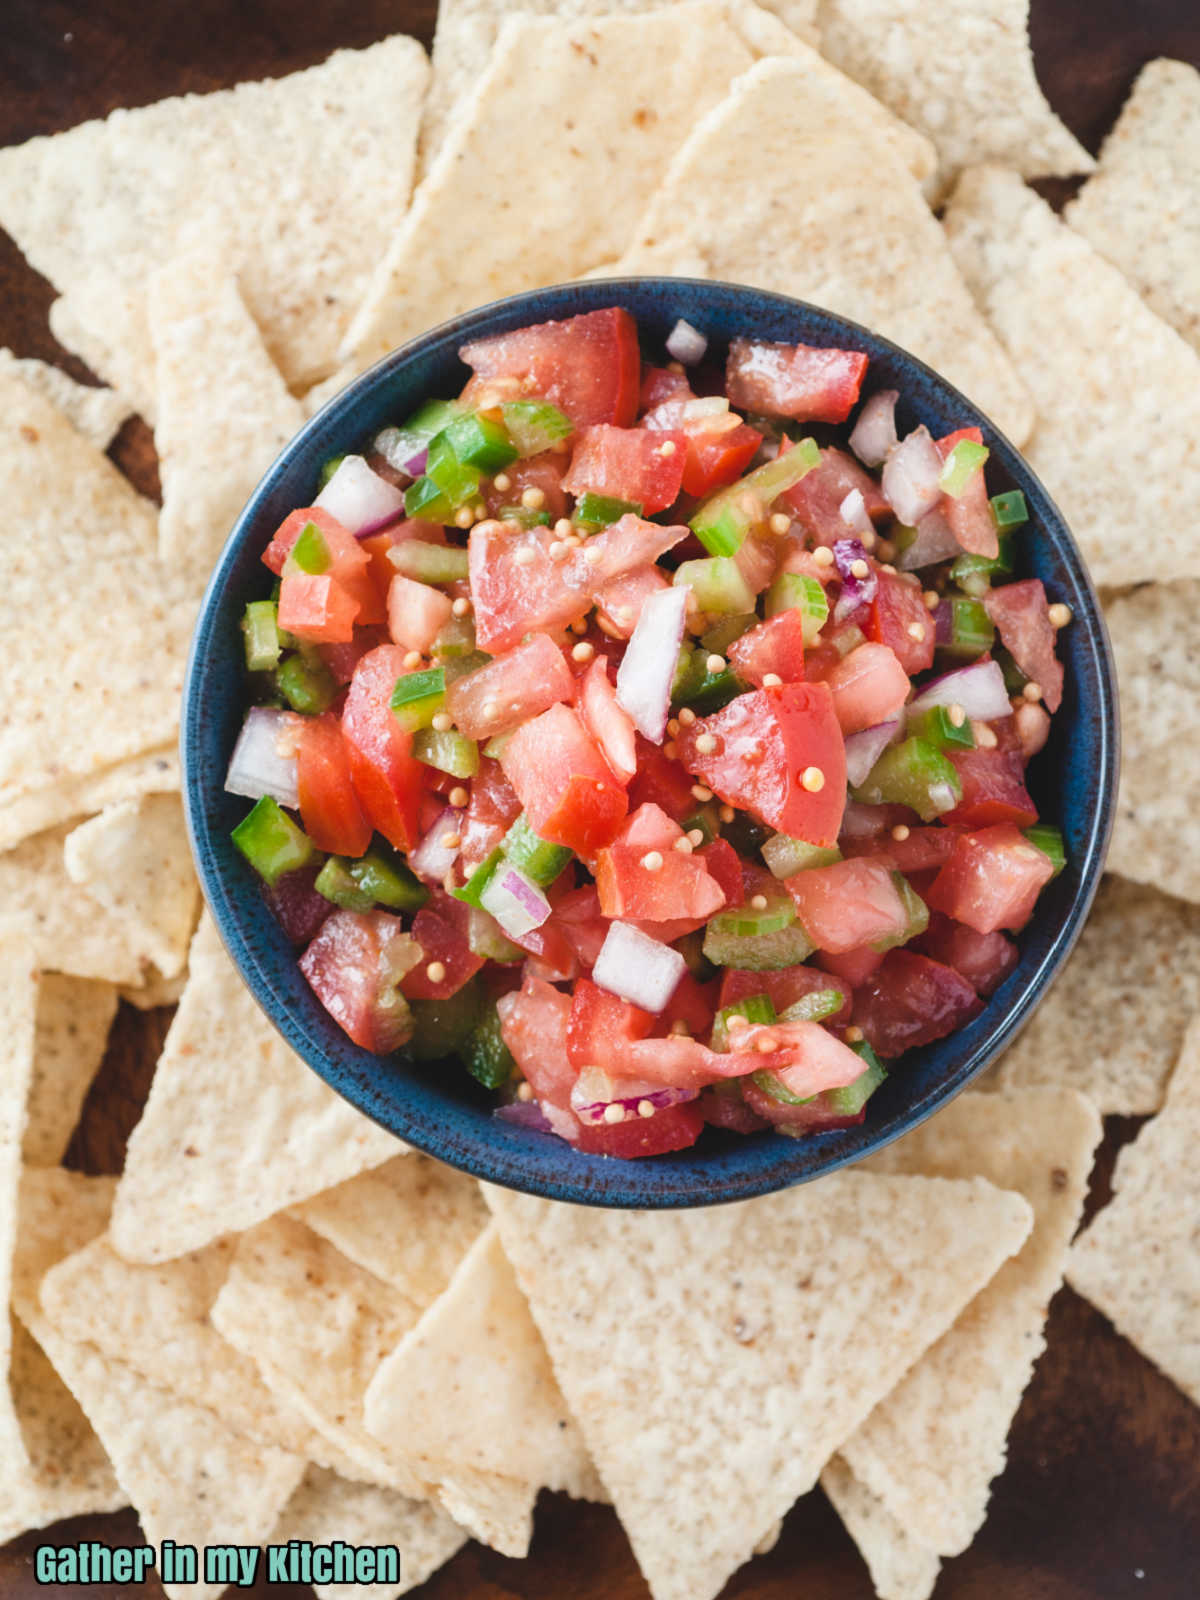 Pico de Gallo without cilantro in a blue bowl on a bed of tortilla chips